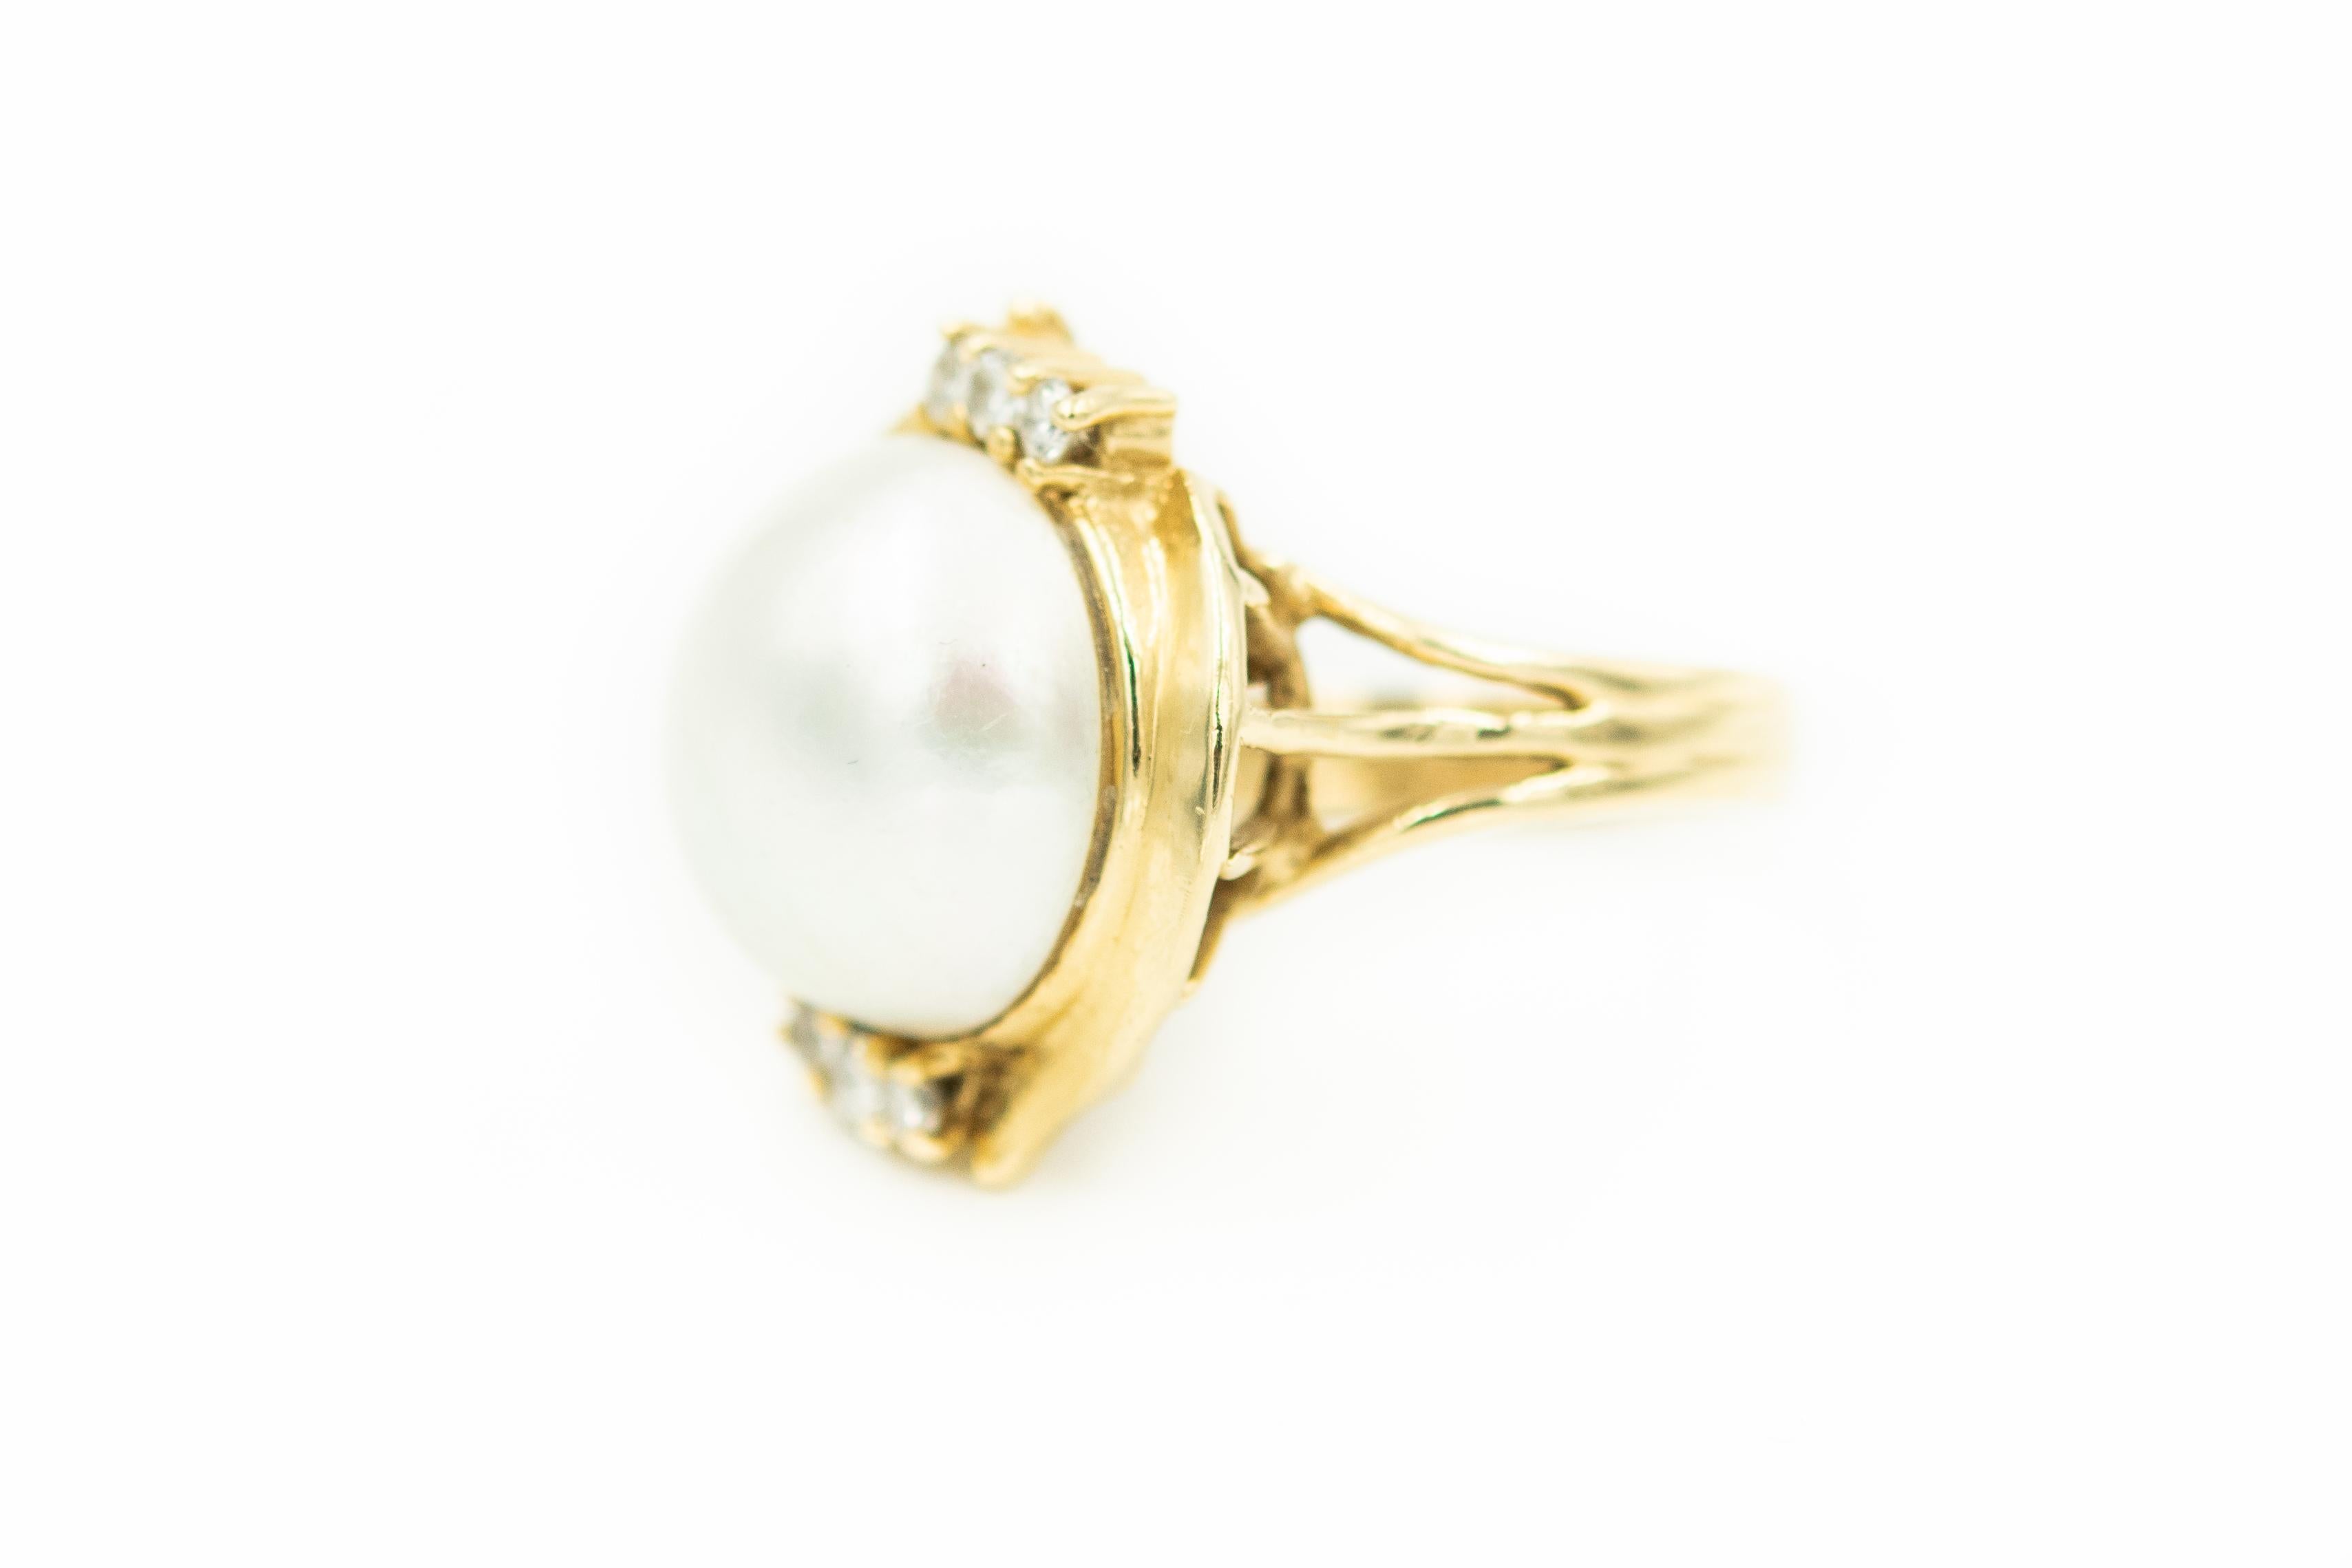 Mabe Pearl dome ring accented by 3 prong set diamonds on either side in a gold styled rim.  The approximate total diamond weight is .12 carats.  The ring is 14k yellow gold. The mabe pearl is over 14mm wide.

It is a US size 7.25

